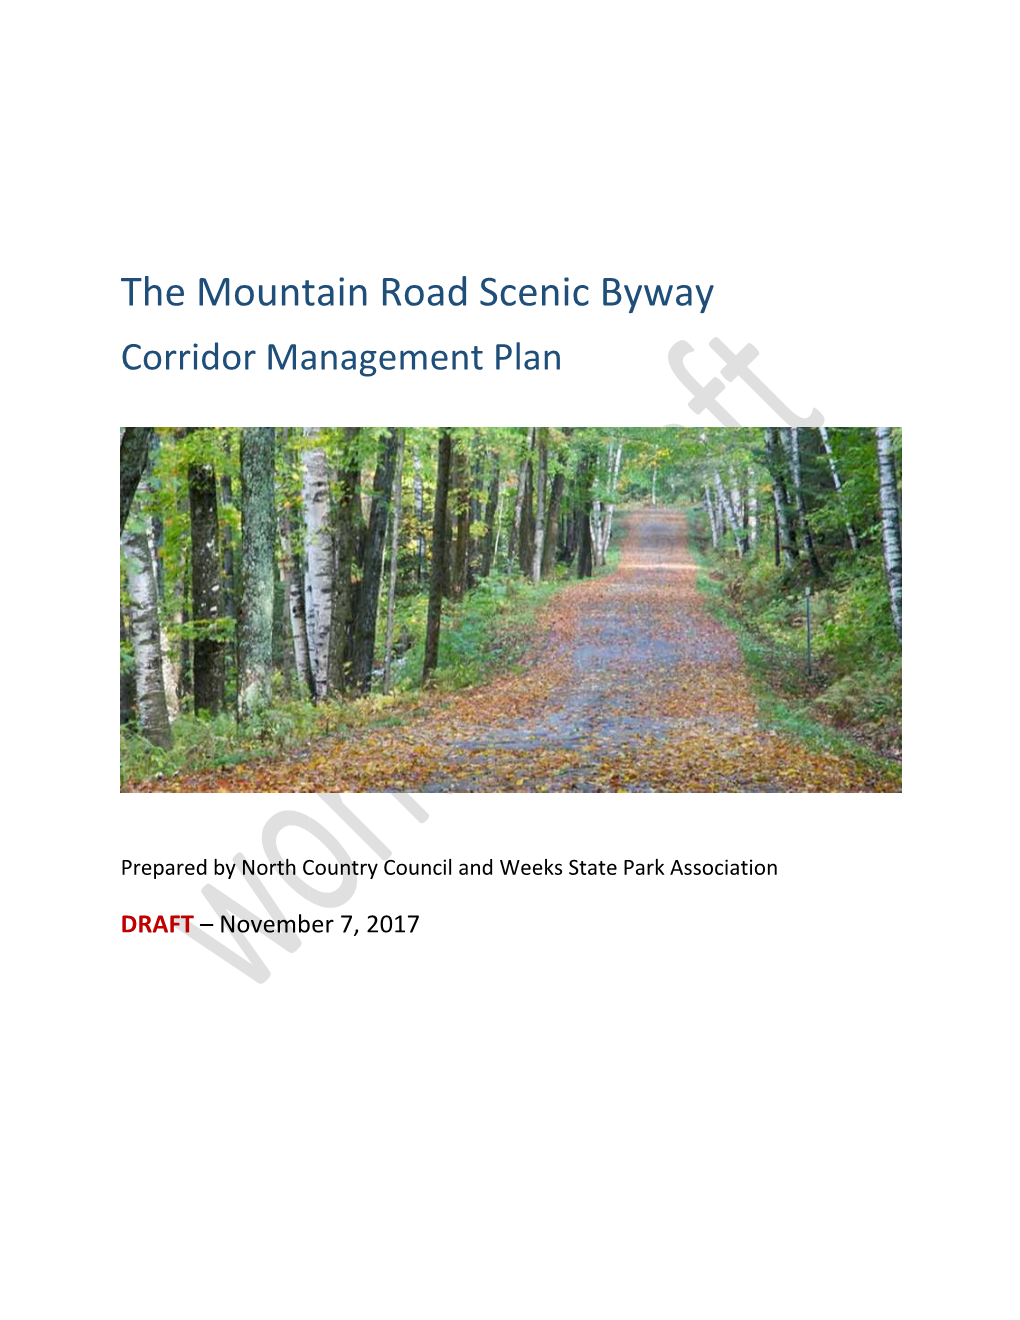 The Mountain Road Scenic Byway Corridor Management Plan